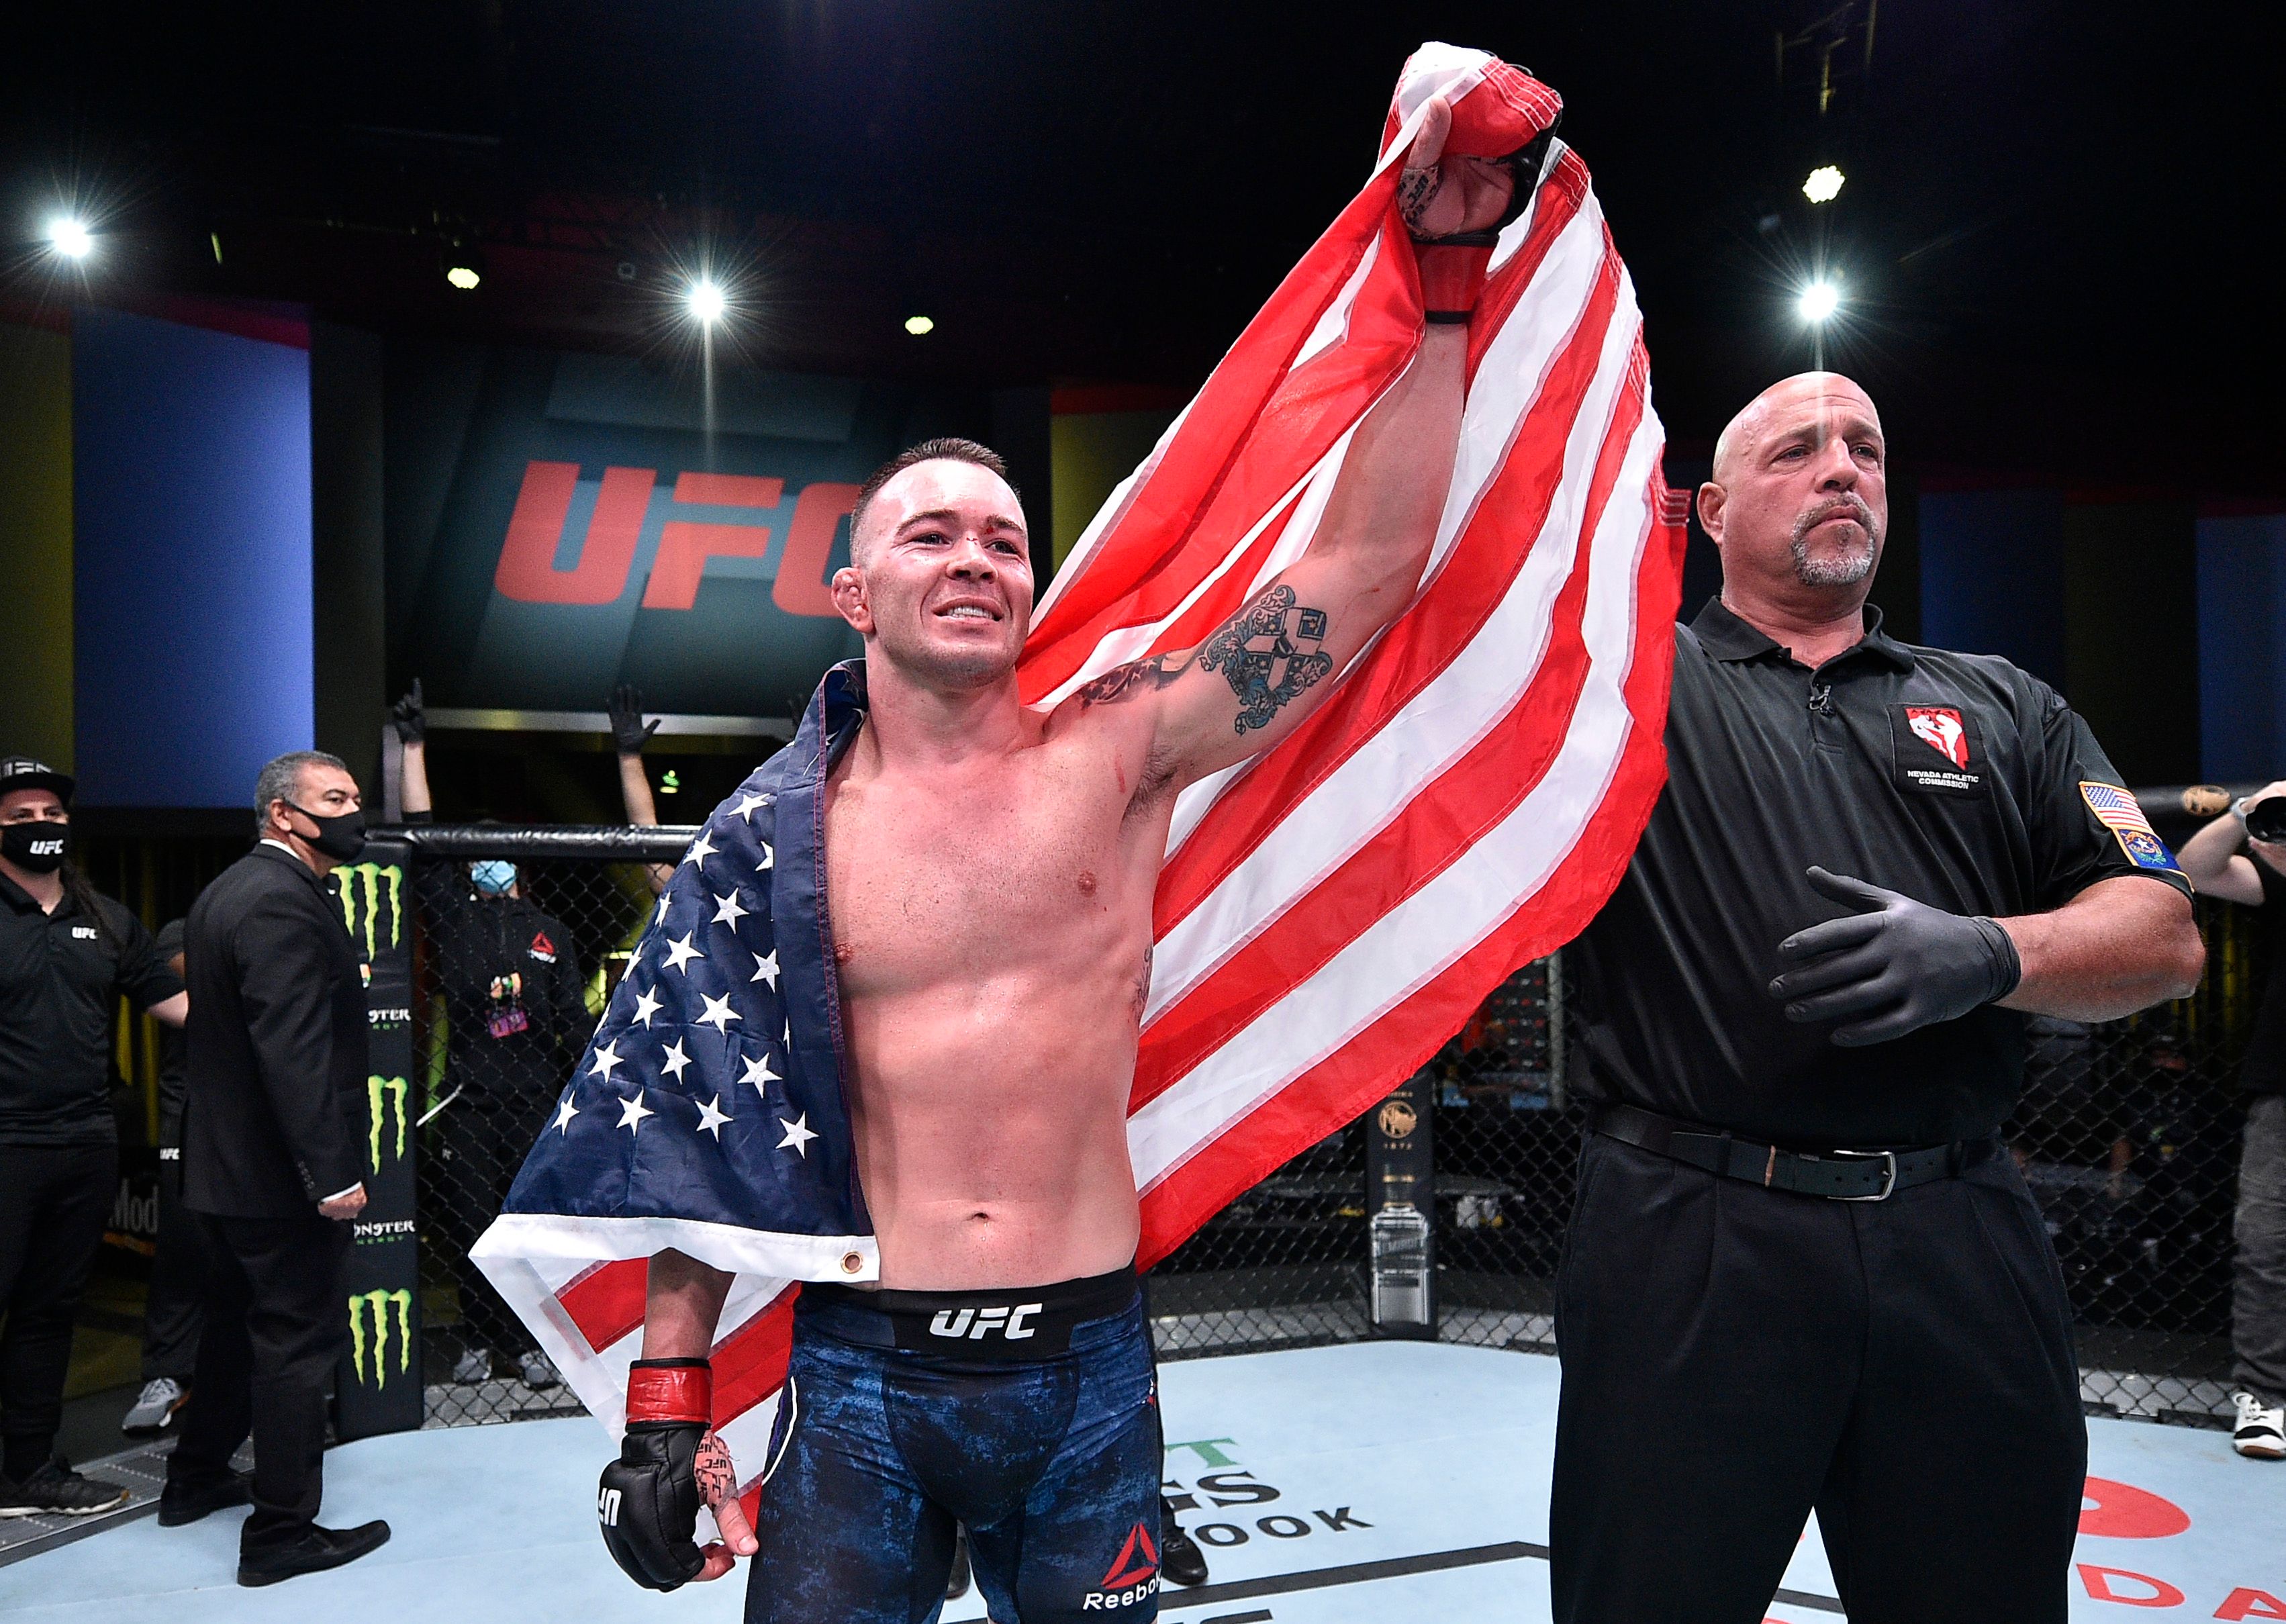 Colby Covington celebrating in the UFC octagon